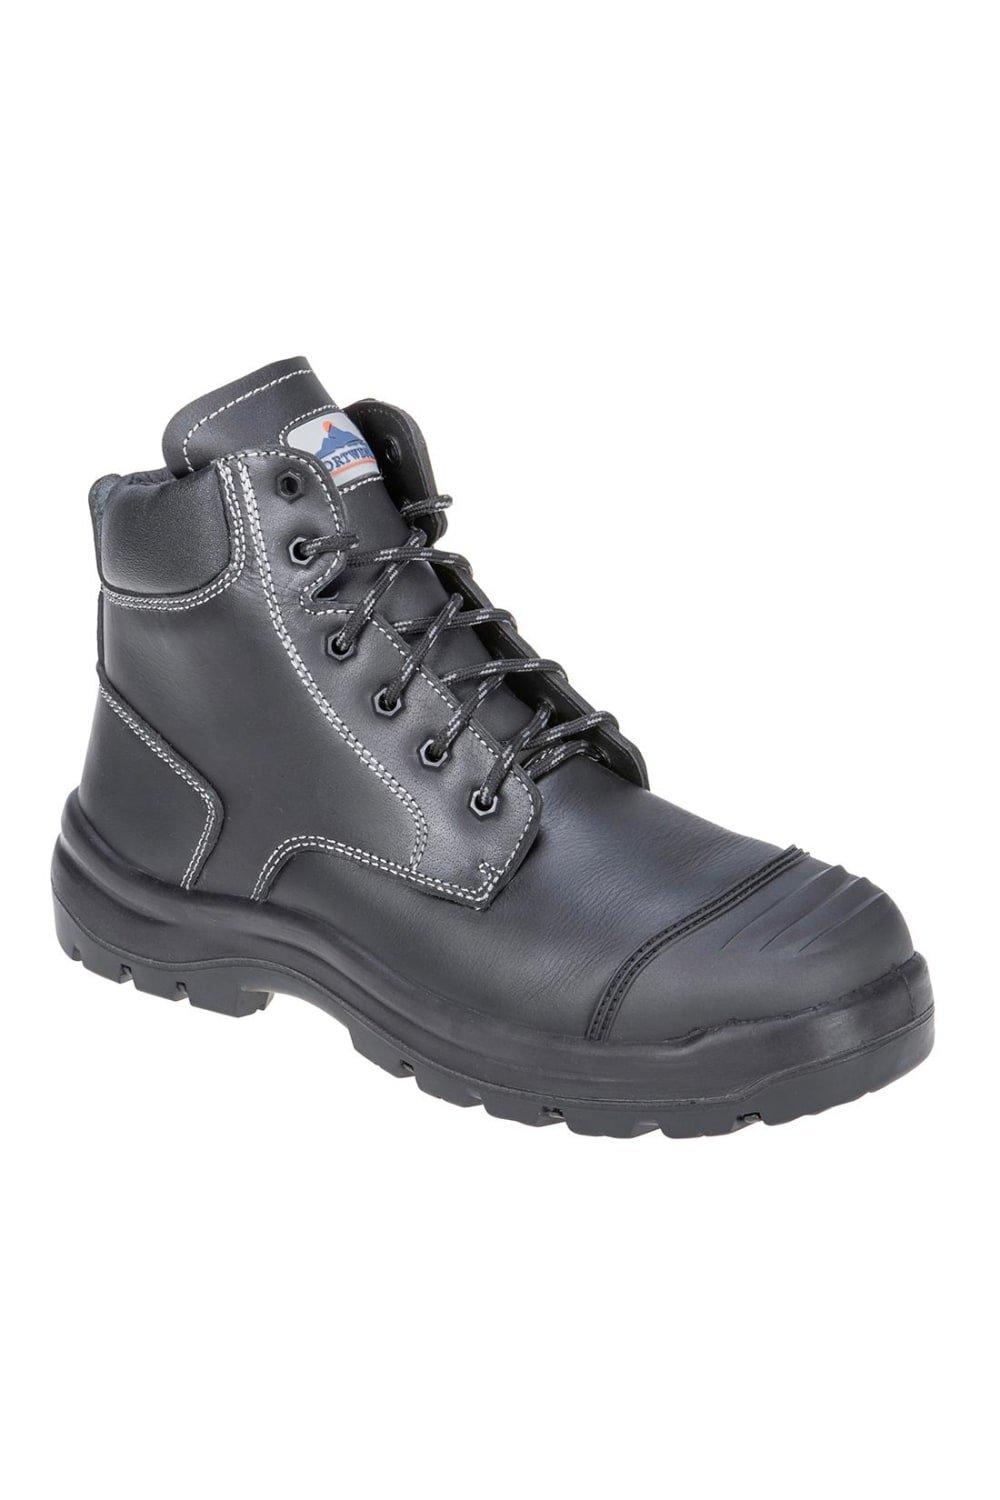 Clyde Safety Boots